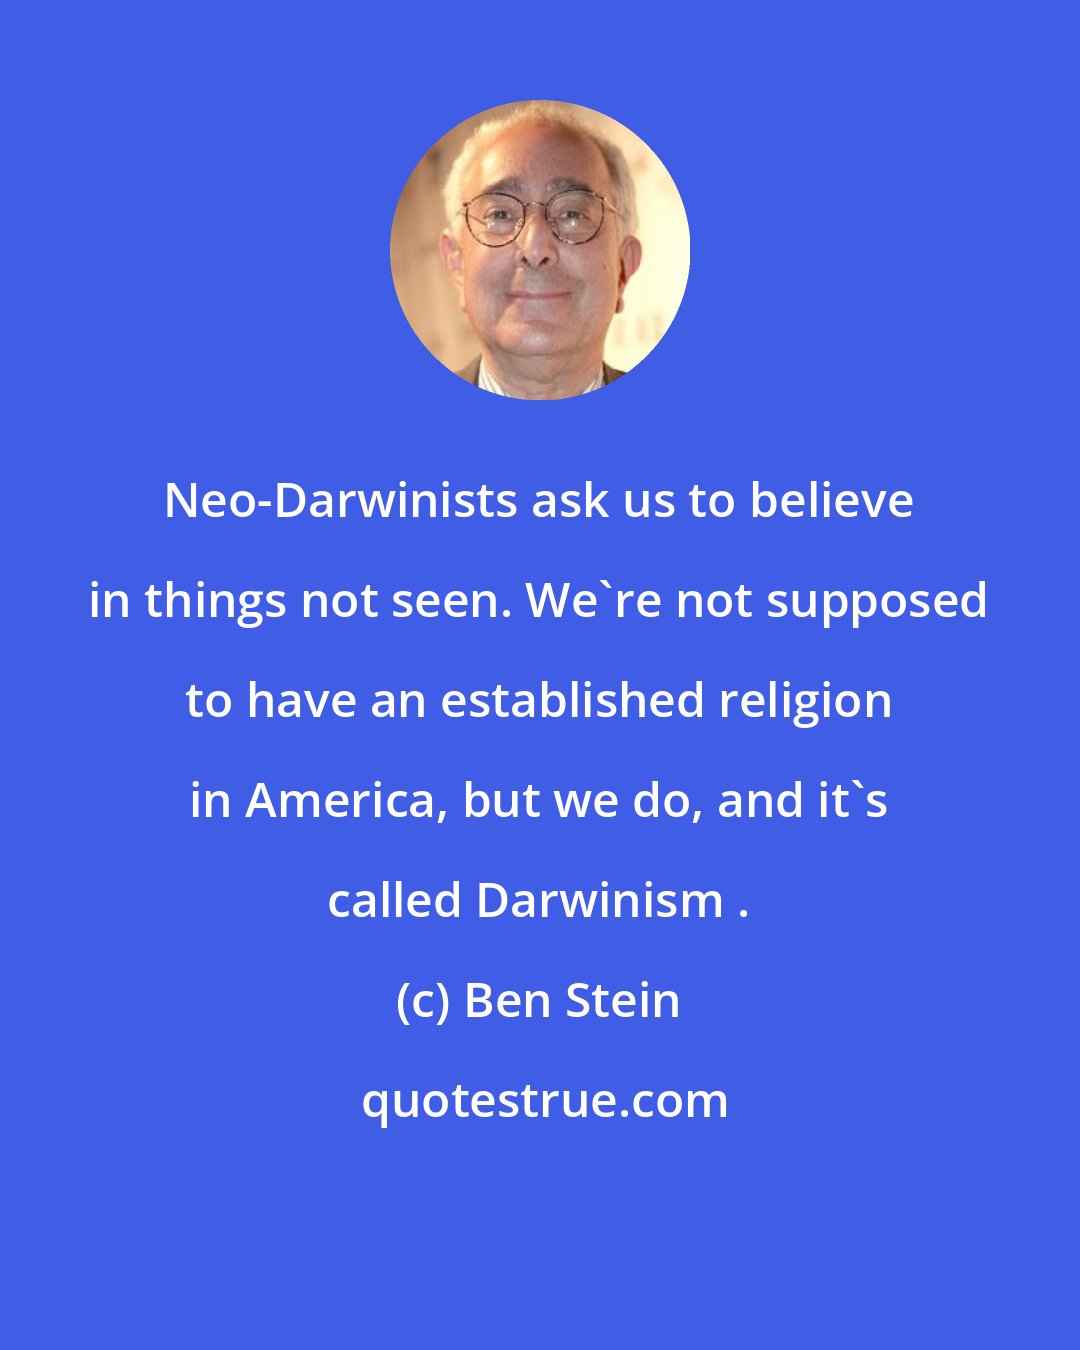 Ben Stein: Neo-Darwinists ask us to believe in things not seen. We're not supposed to have an established religion in America, but we do, and it's called Darwinism .